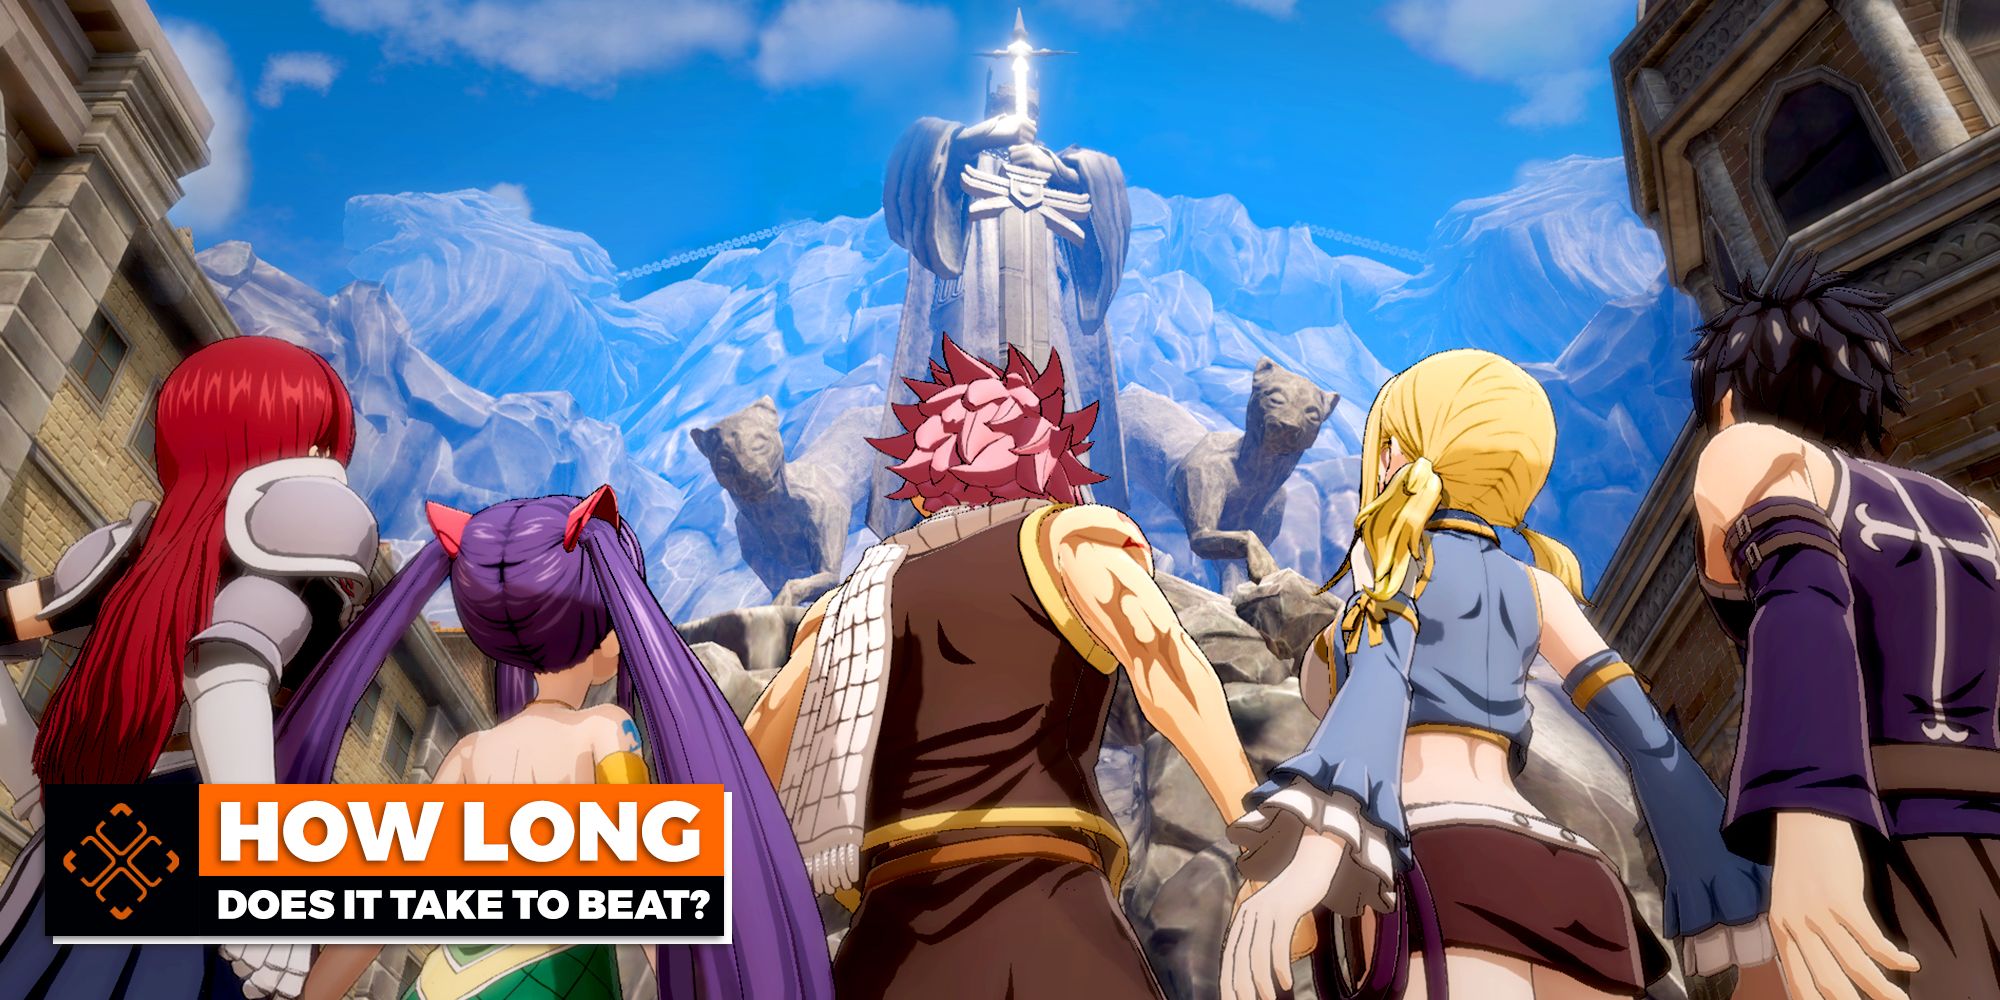 Game screen from Fairy Tail.